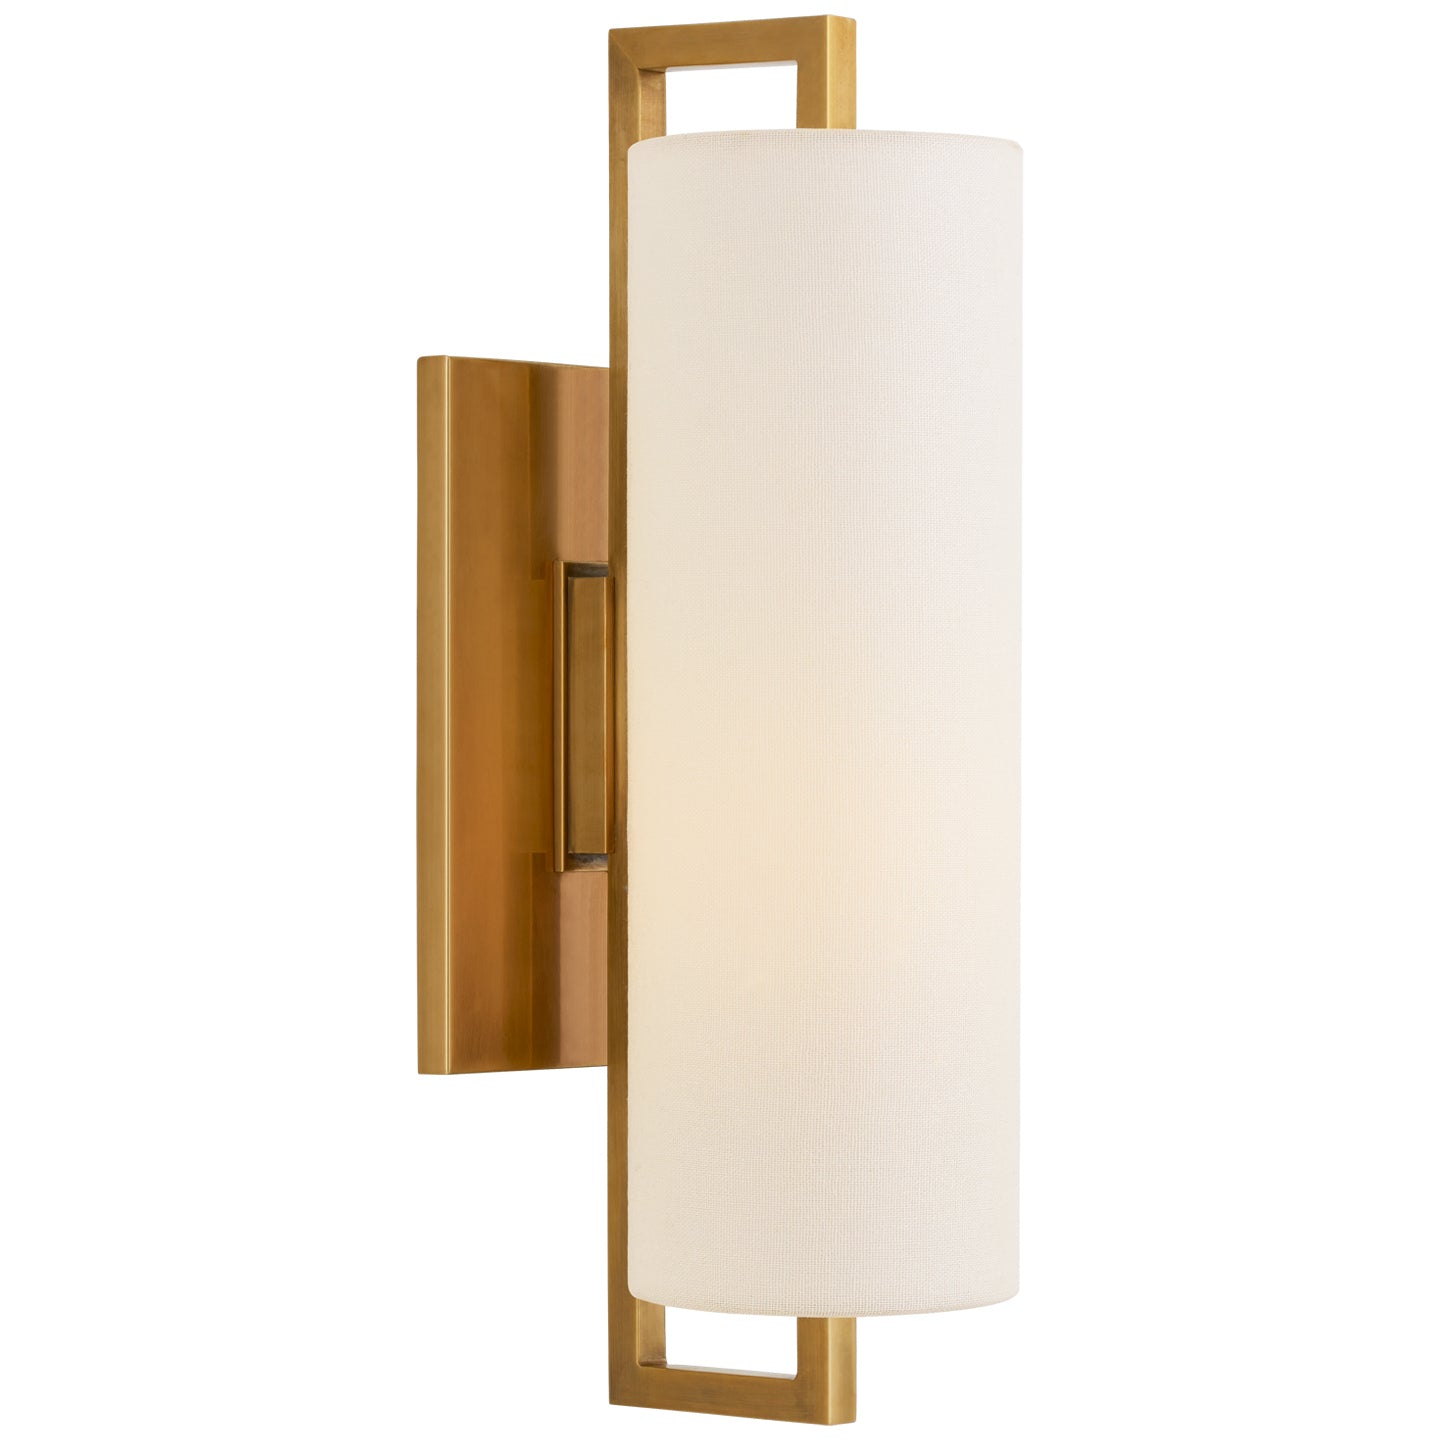 Load image into Gallery viewer, Visual Comfort Signature - S 2520HAB-L - LED Wall Sconce - Bowen - Hand-Rubbed Antique Brass
